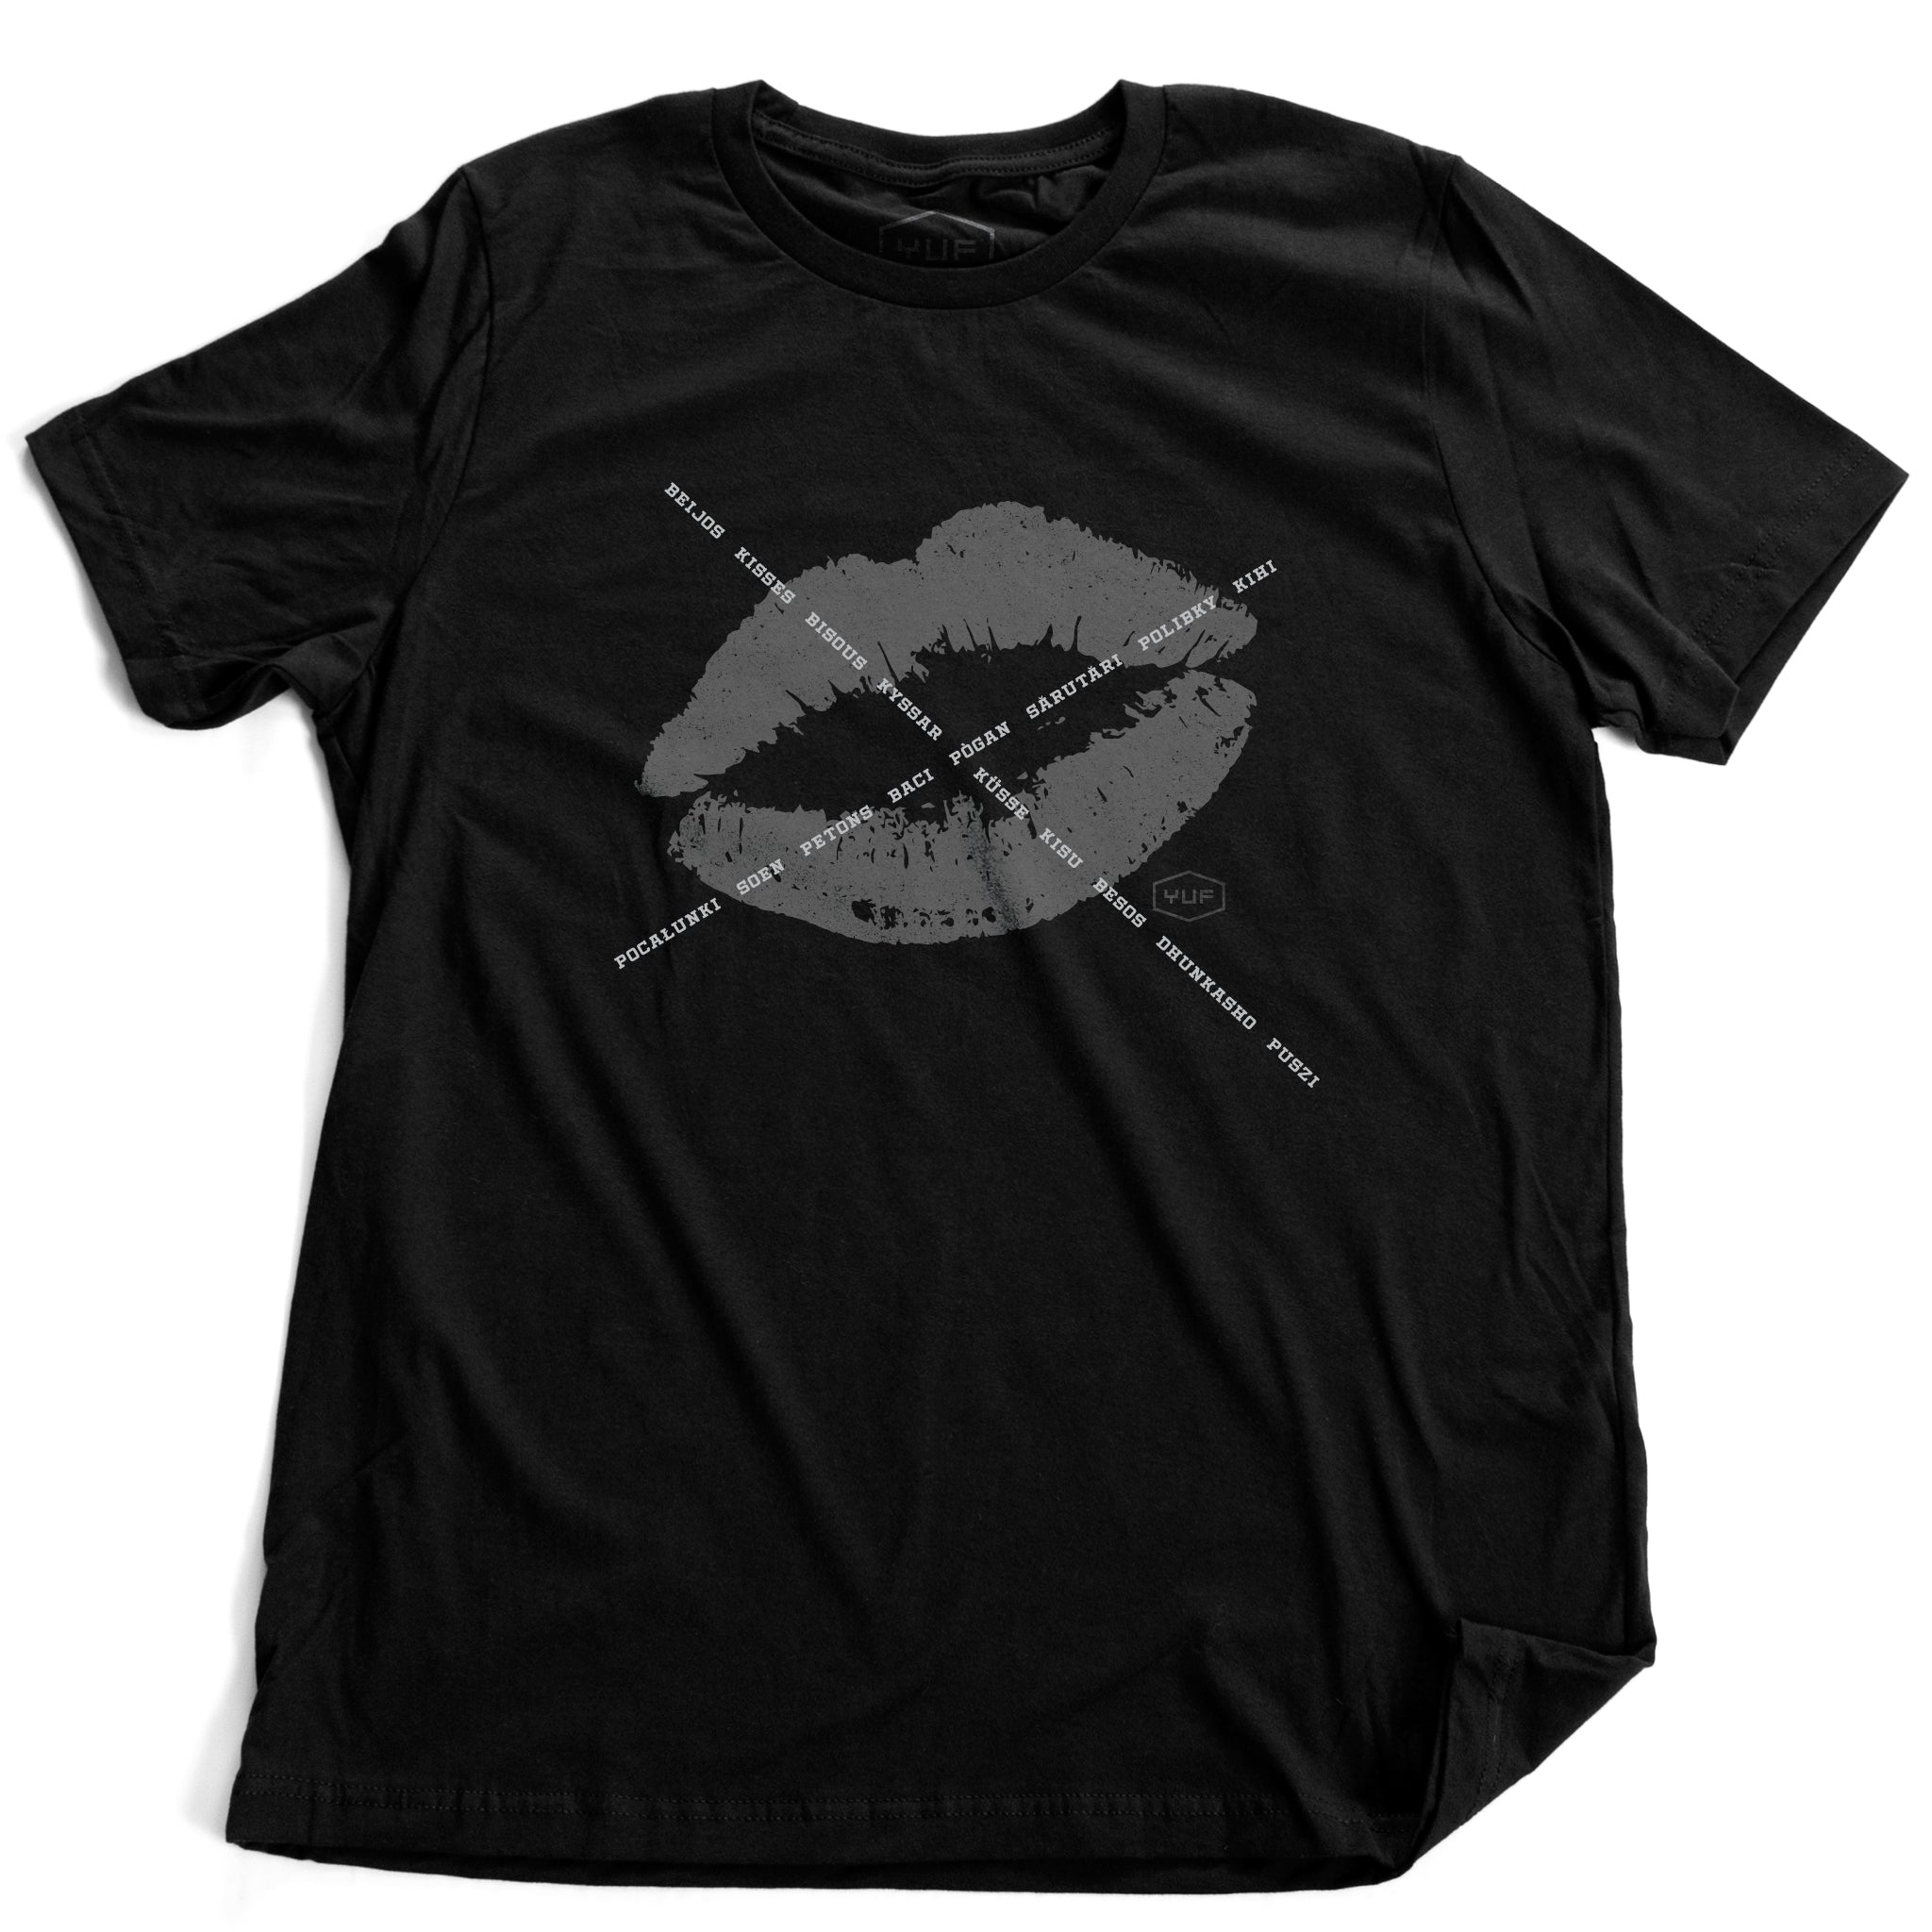 A unisex fashion t-shirt in black, featuring a lipstick kiss graphic, criss-crossed by the word for “kiss” in various languages. A classic icon reminiscent of Marilyn Monroe’s signature mark. By fashion brand YUF, from wolfsaint.net